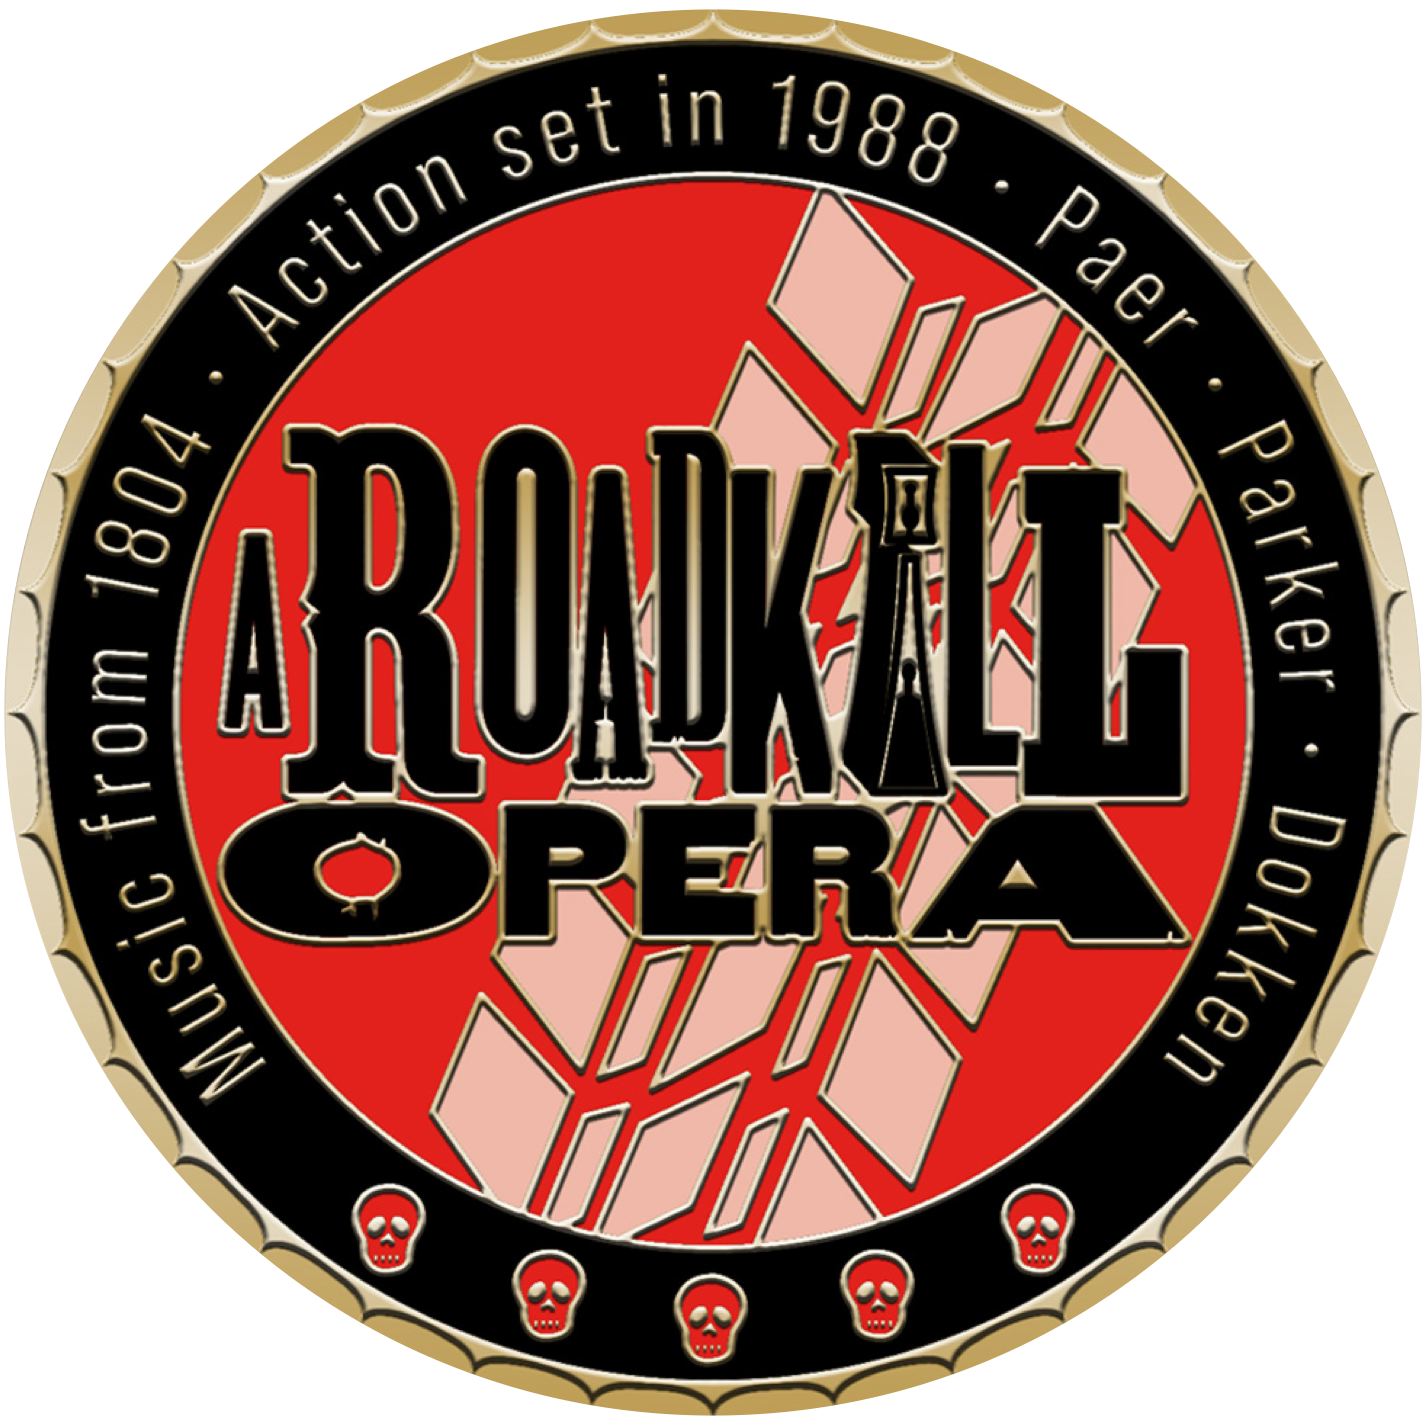 Round logo. The center has A Roadkill Opera in large, black letters outlined in gold, over a red background with pink tire tracks. There is a black band around the center, with five gold skulls and gold lettering: Music from 1804. Action set in 1988. Paer. Parker. Dokken.